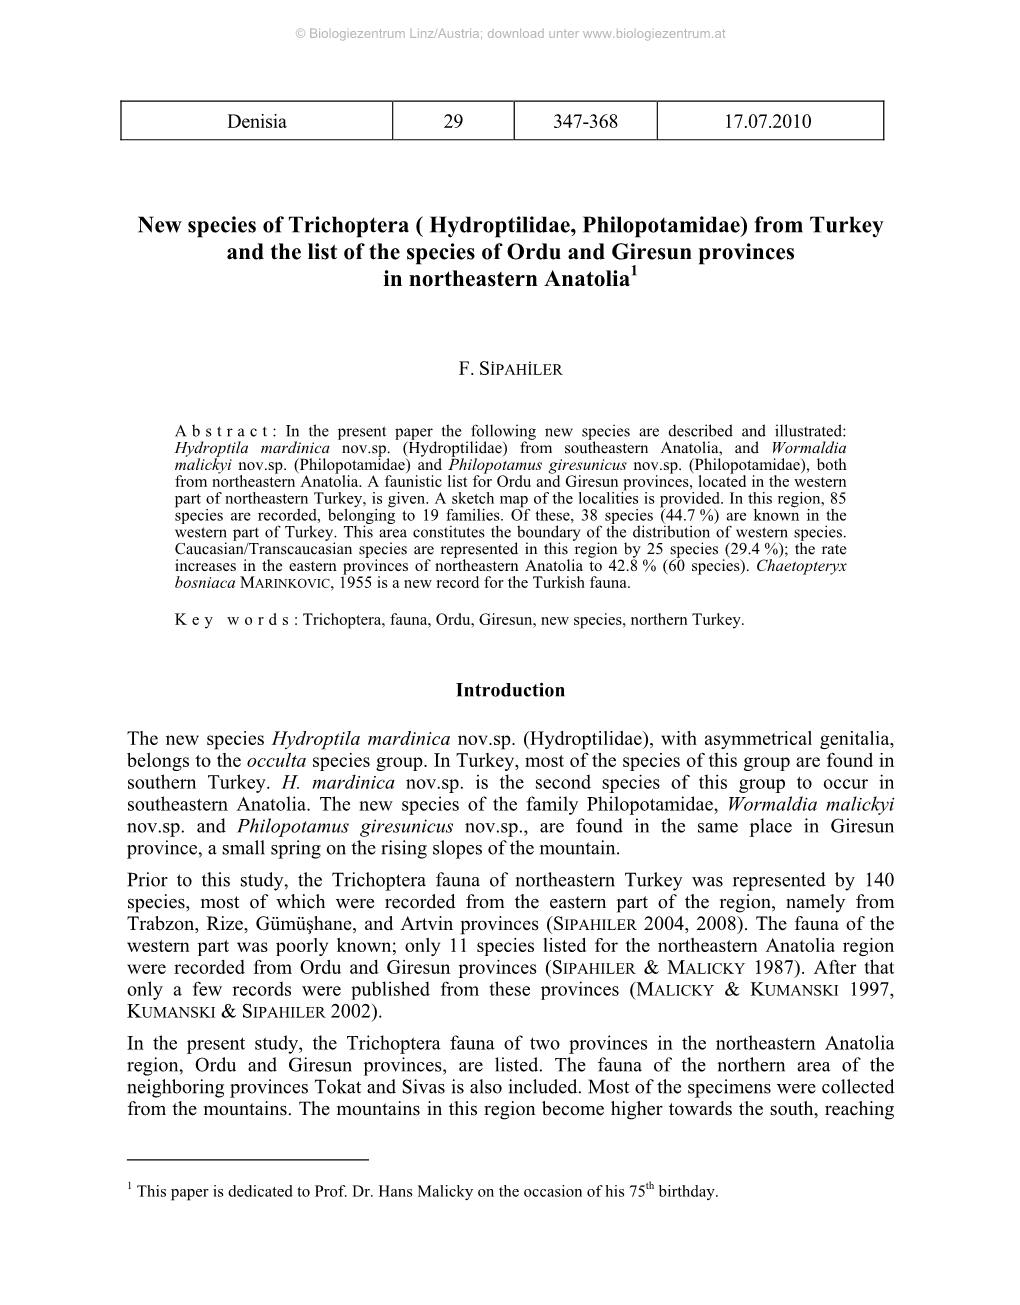 New Species of Trichoptera ( Hydroptilidae, Philopotamidae) from Turkey and the List of the Species of Ordu and Giresun Provinces in Northeastern Anatolia1